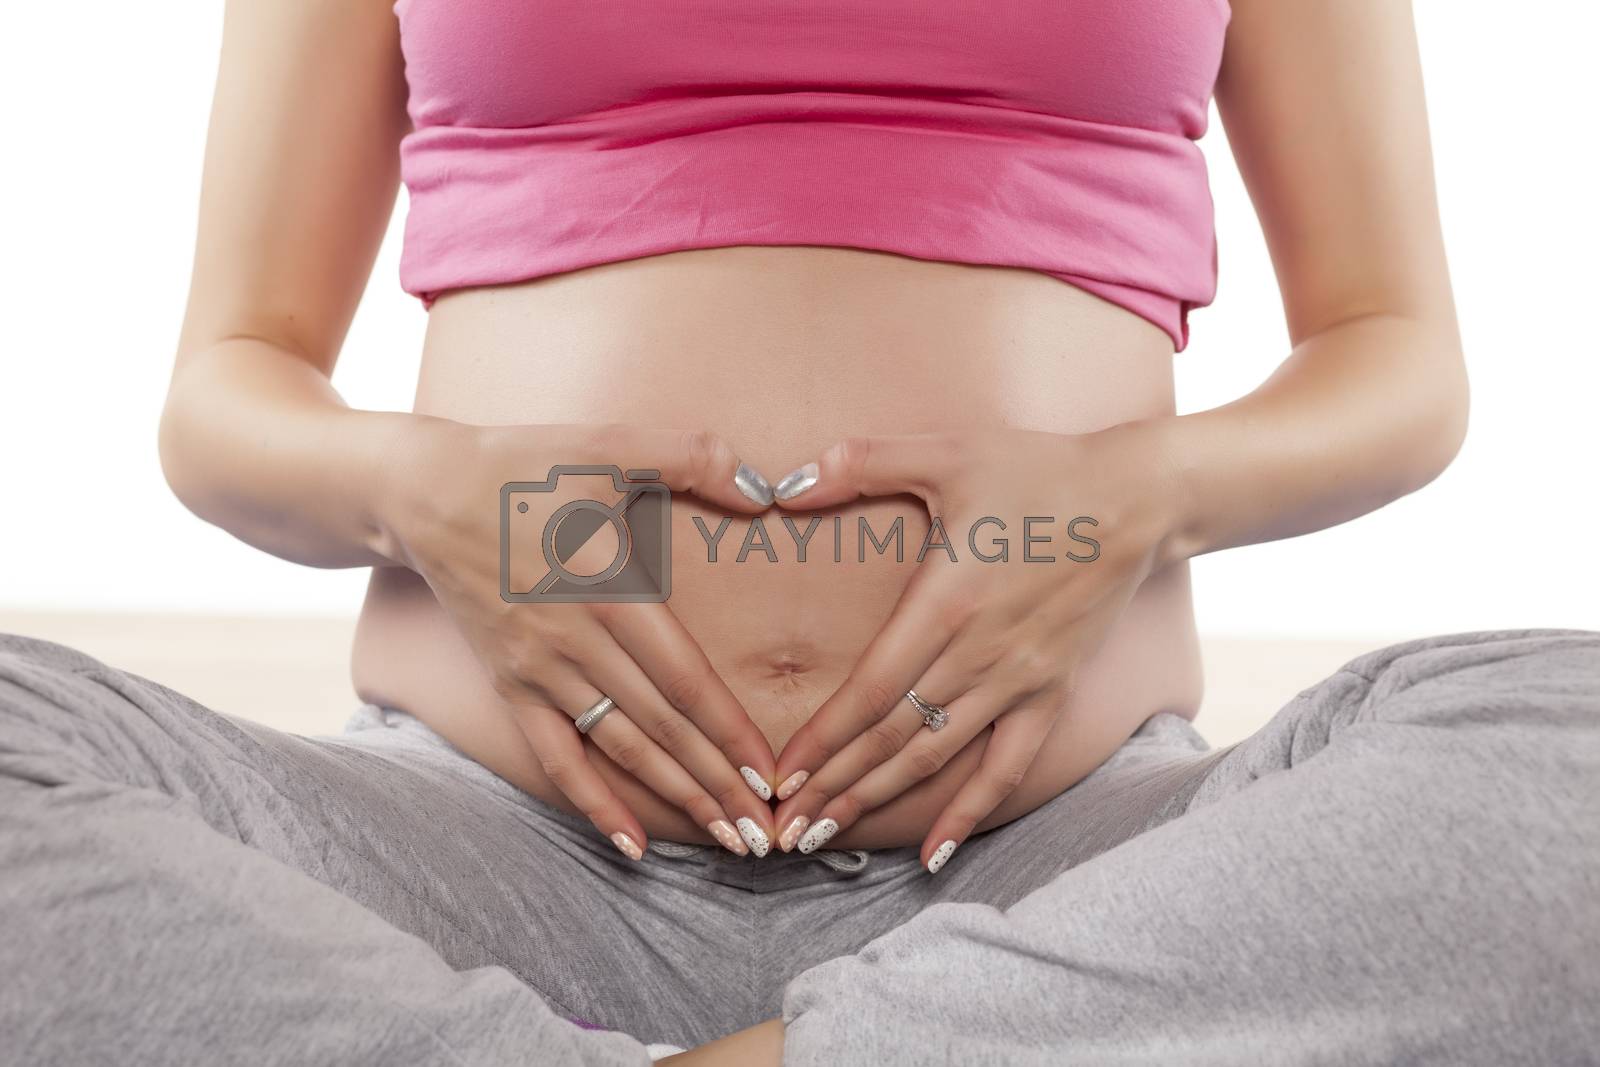 Royalty free image of pregnant woman in sitting position by Vladimirfloyd